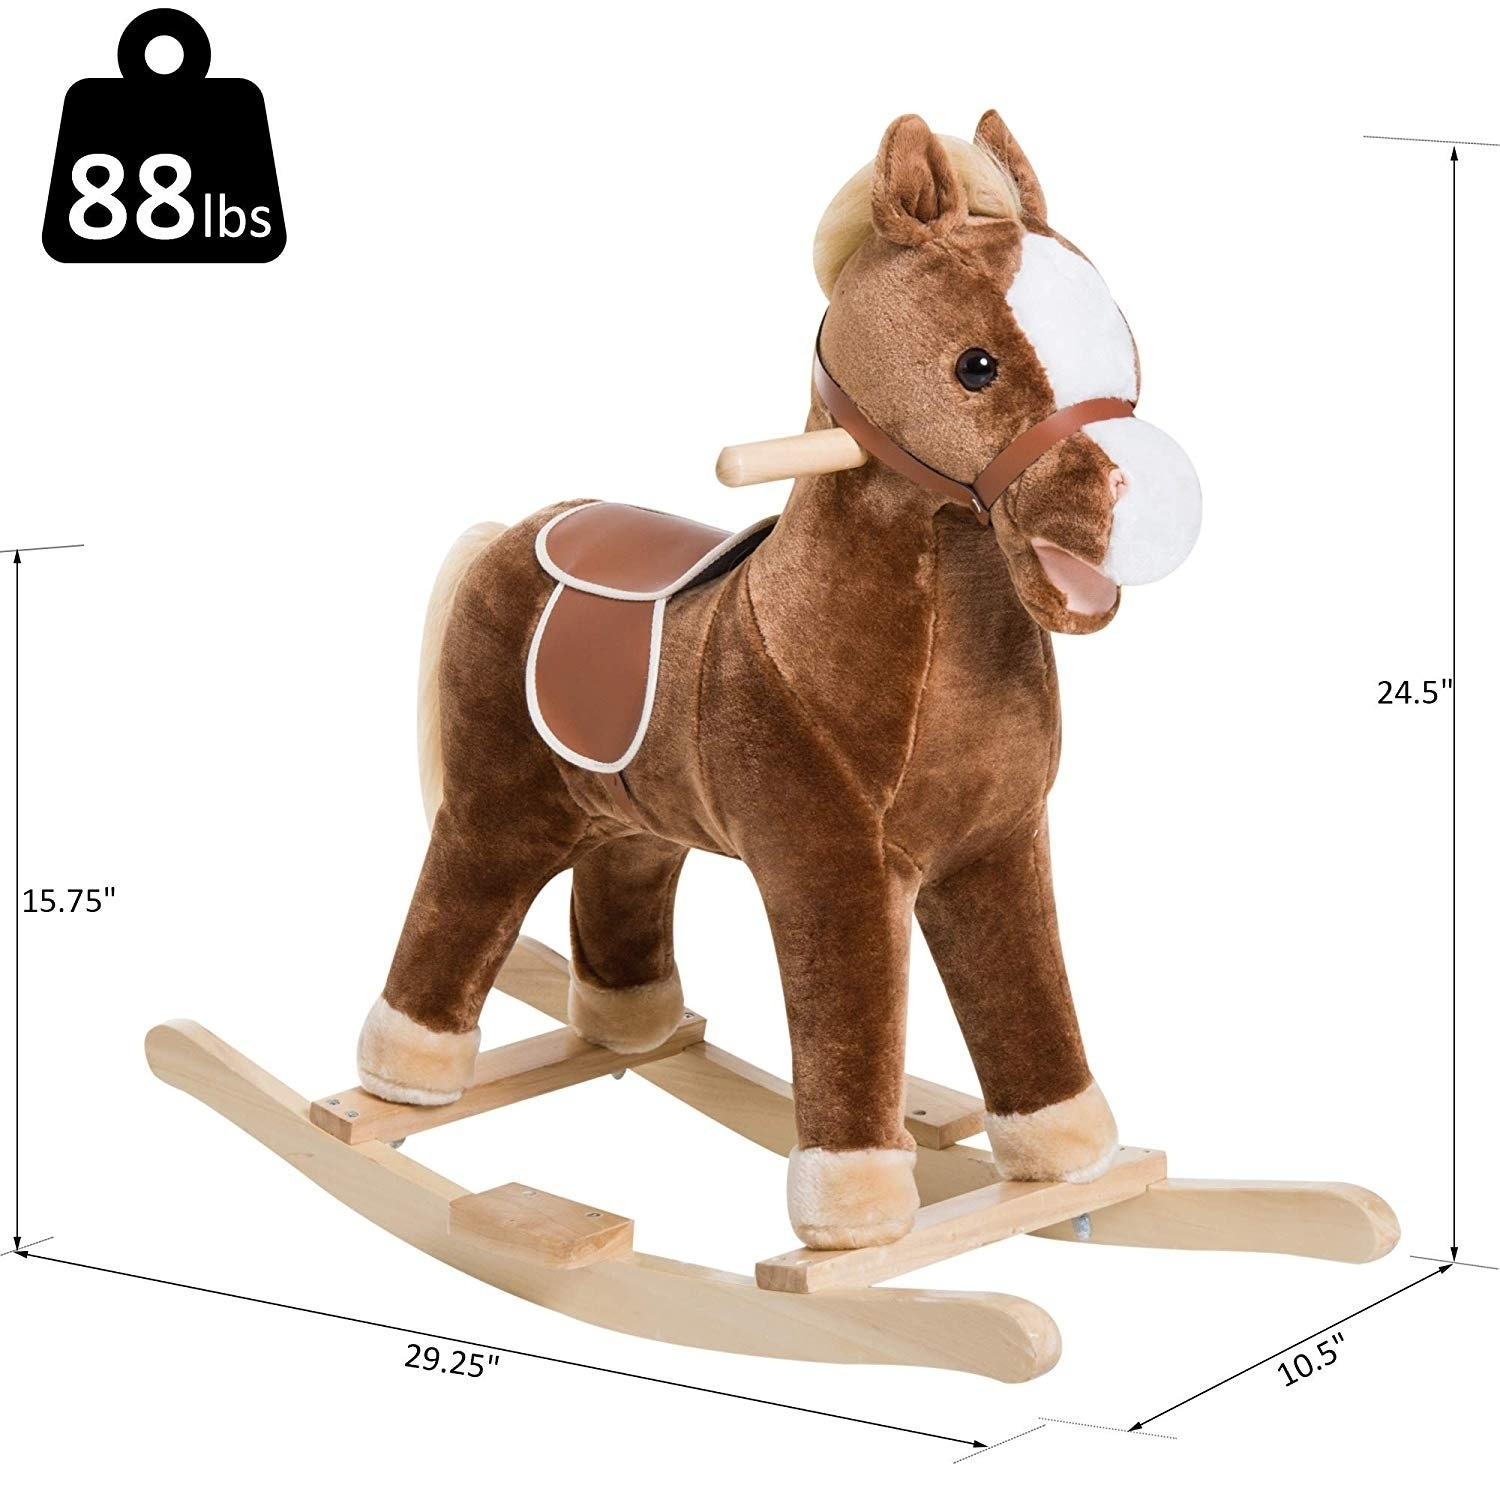 horse to ride toy